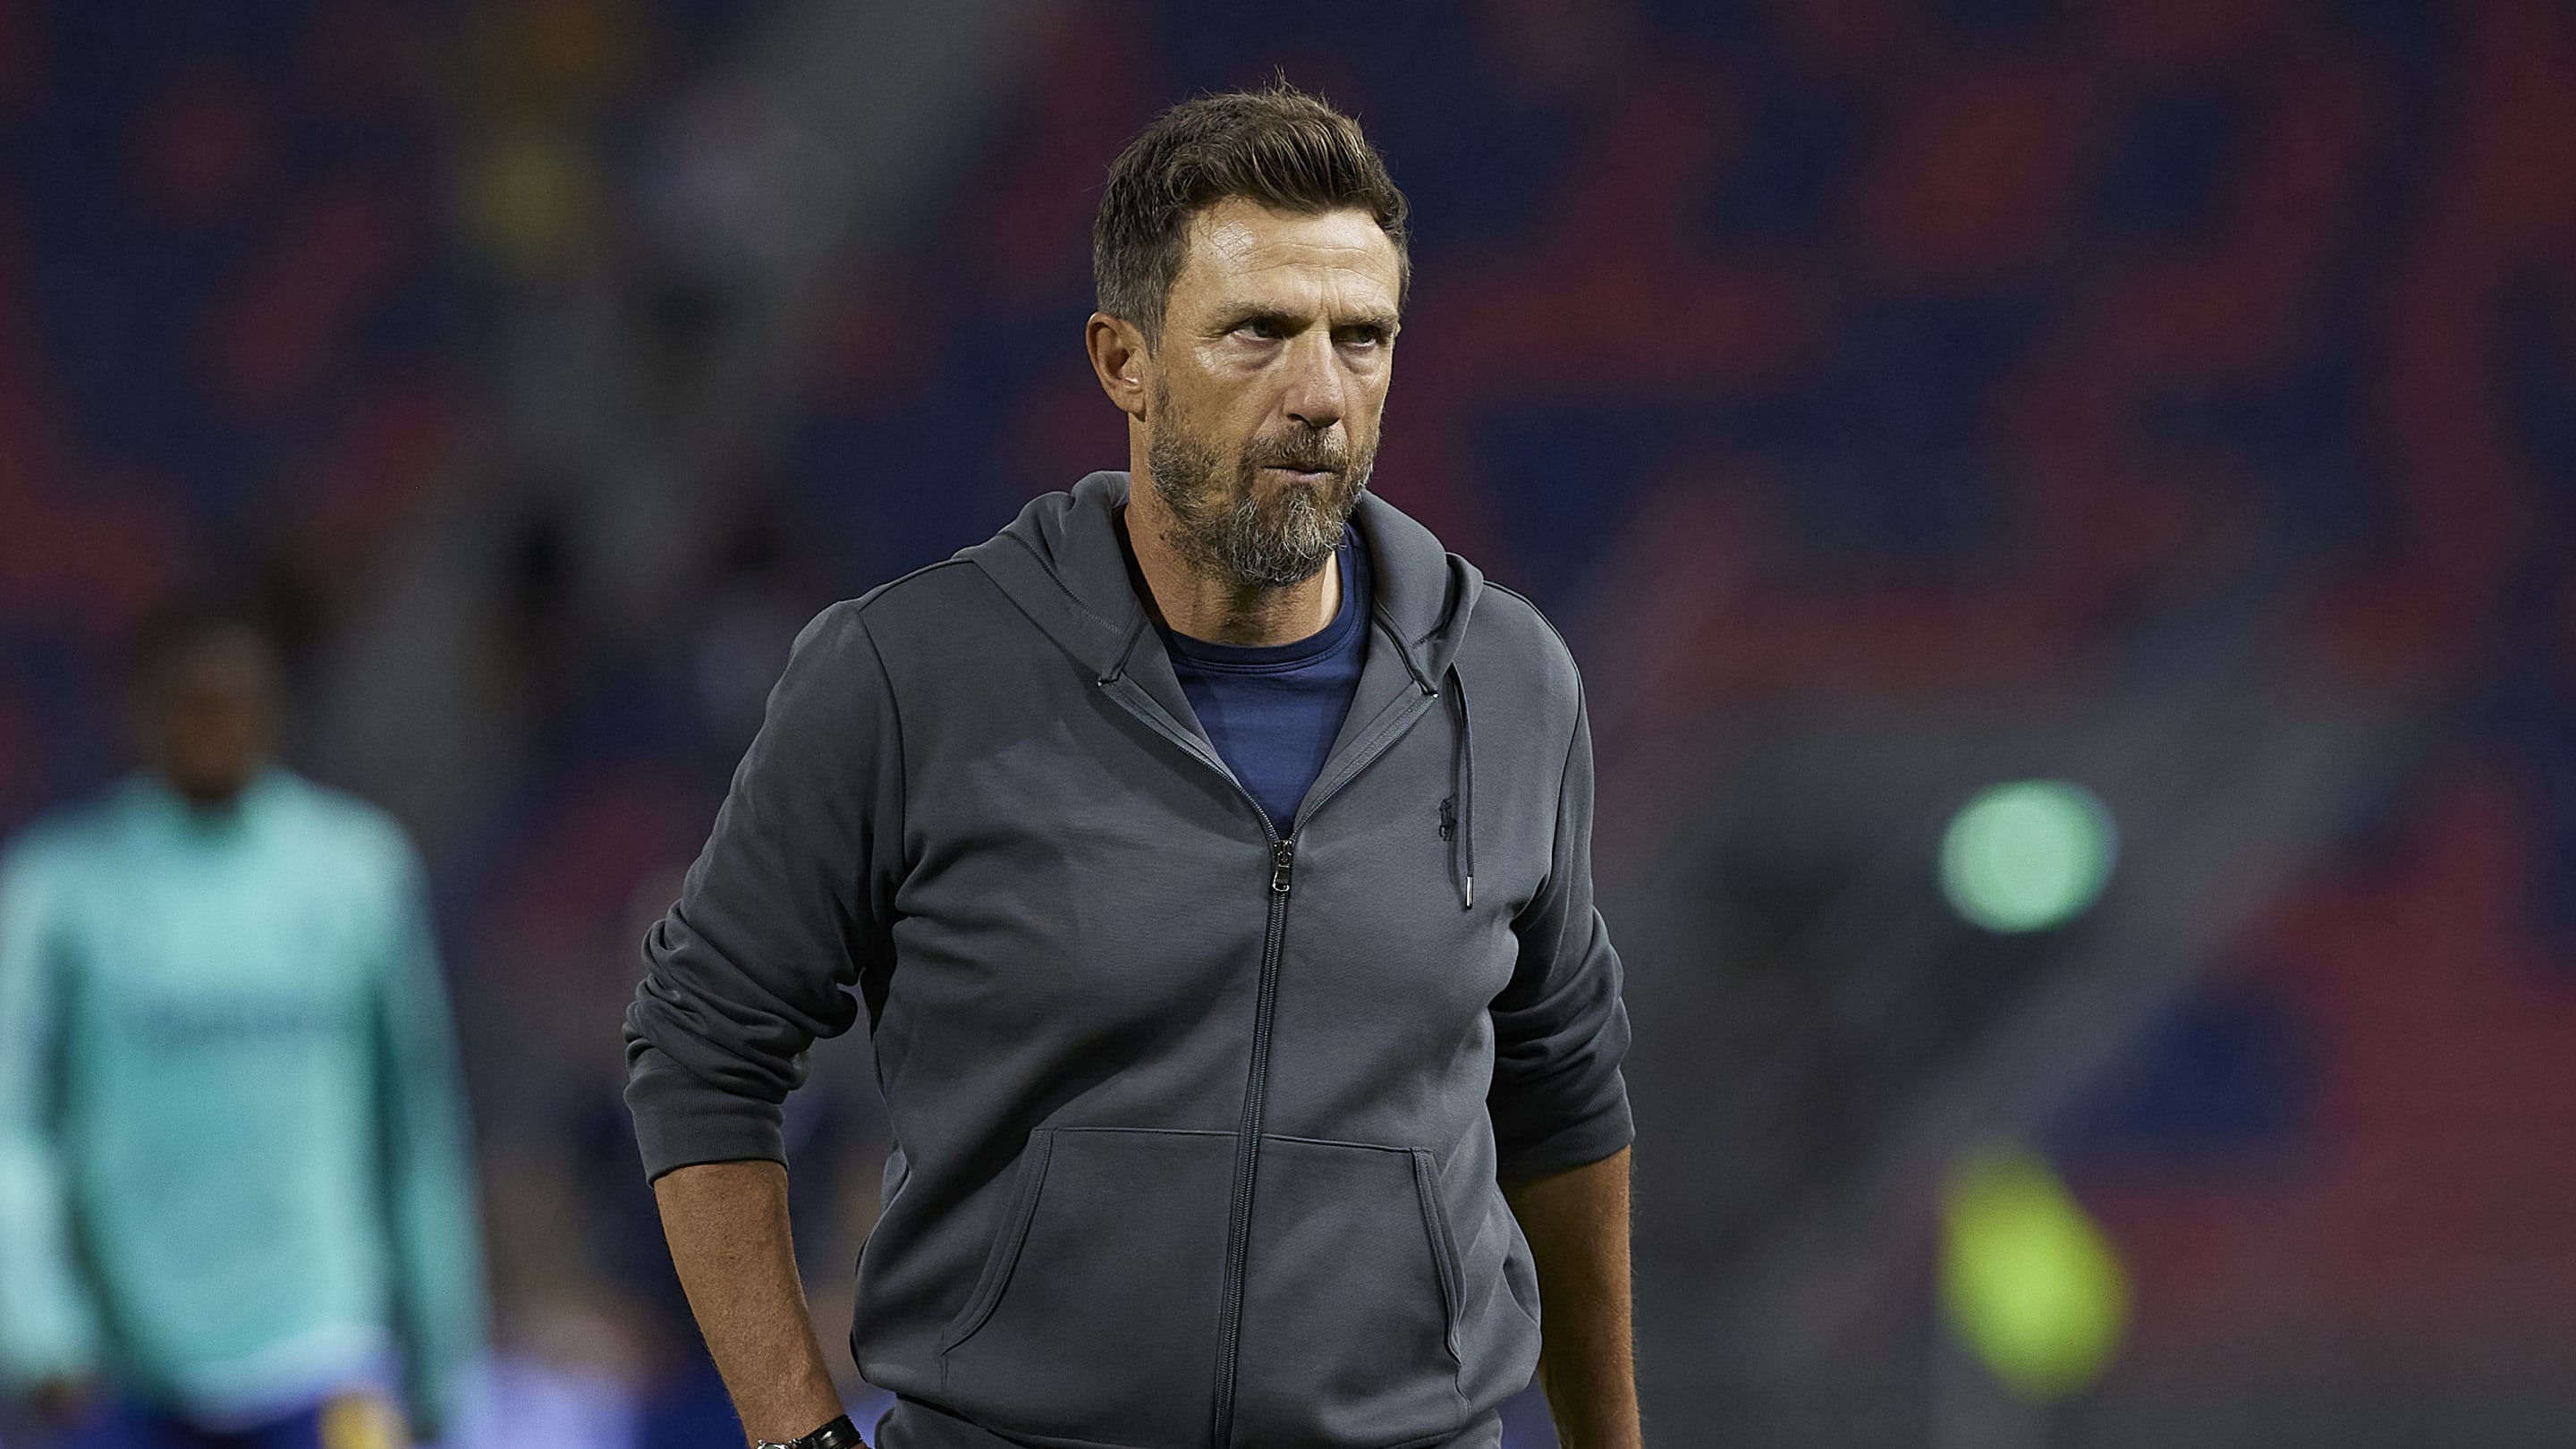 Eusebio Di Francesco emerges as Wolves option to replace sacked Bruno Lage